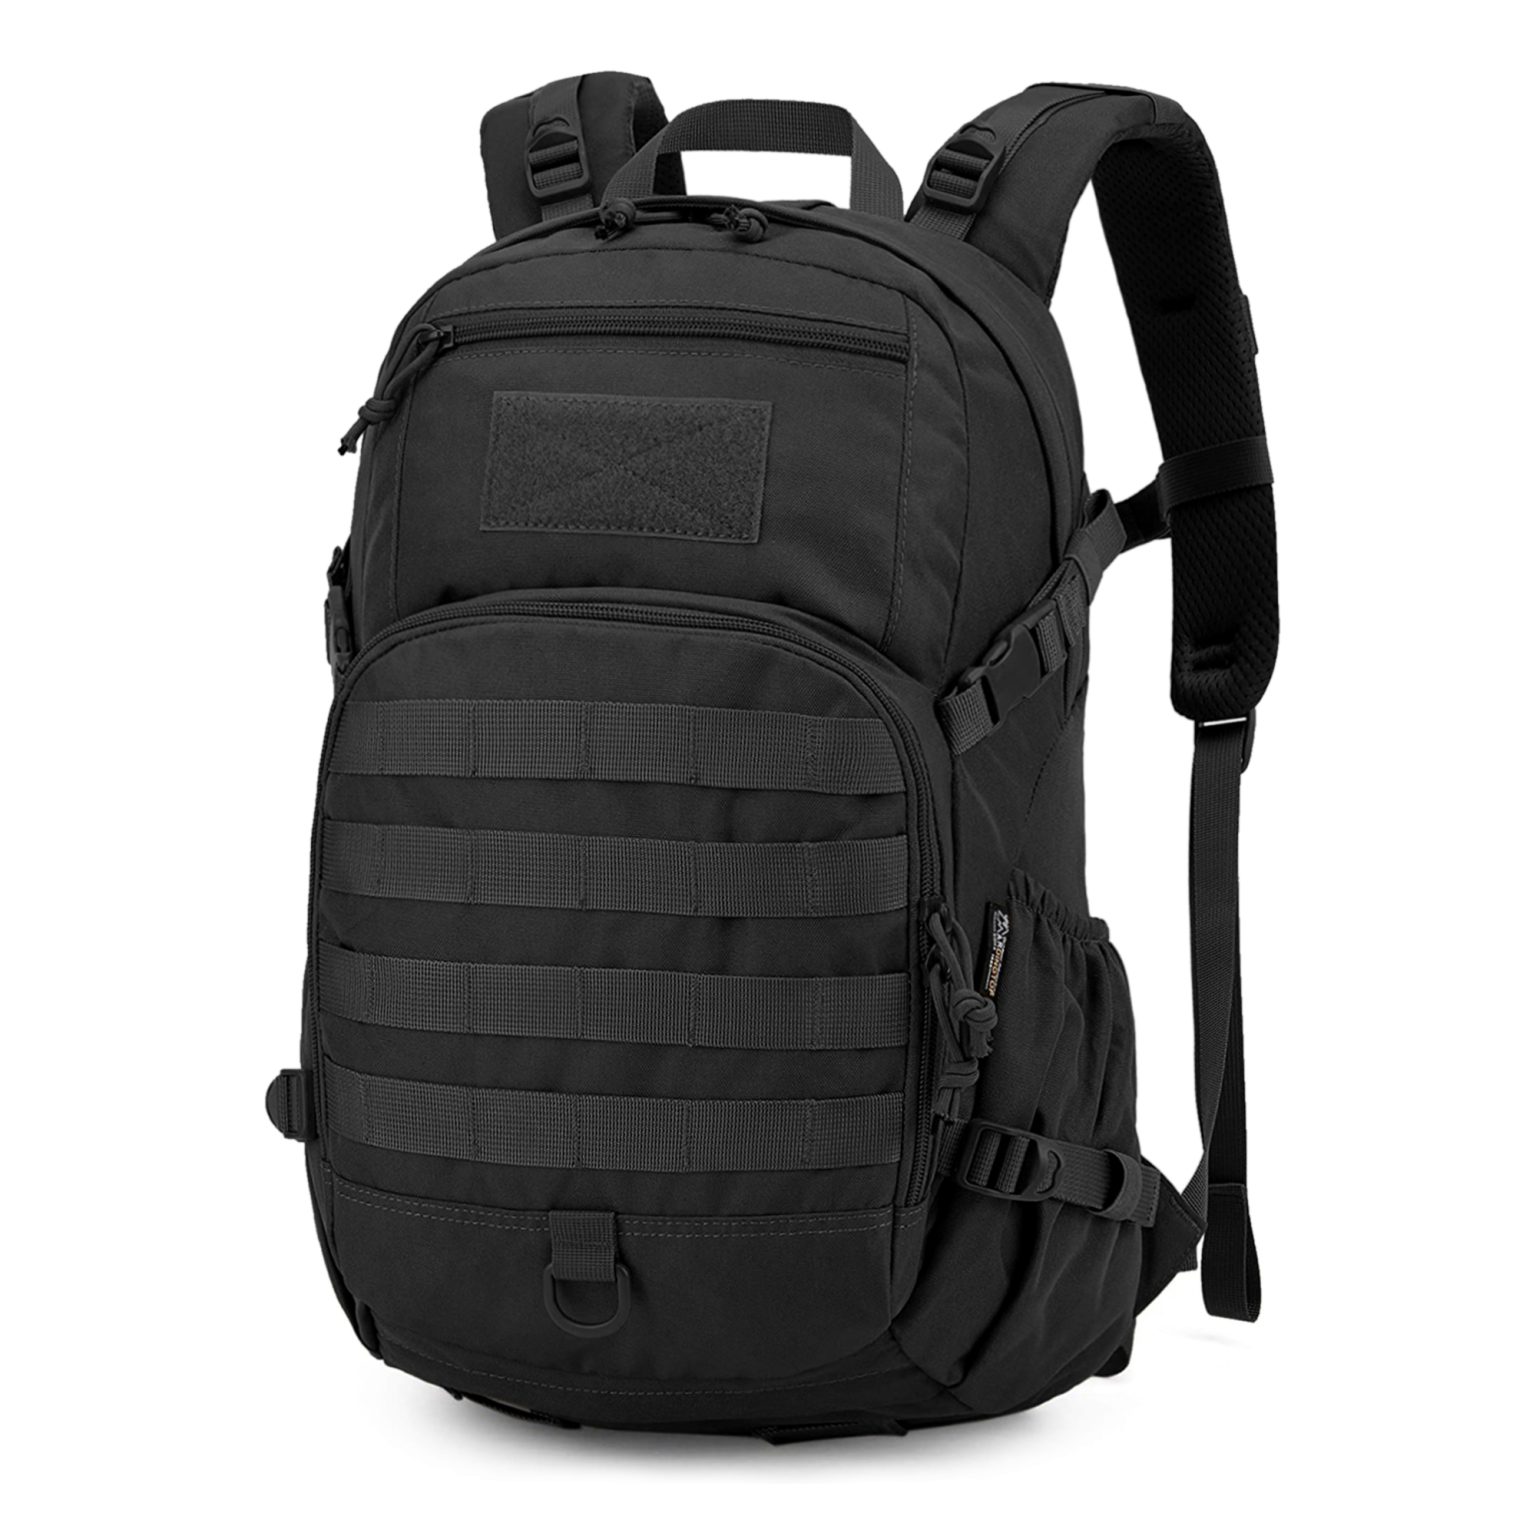 [M6539] Mardingtop Small Tactical Backpack with Rain Cover, 25L Molle ...